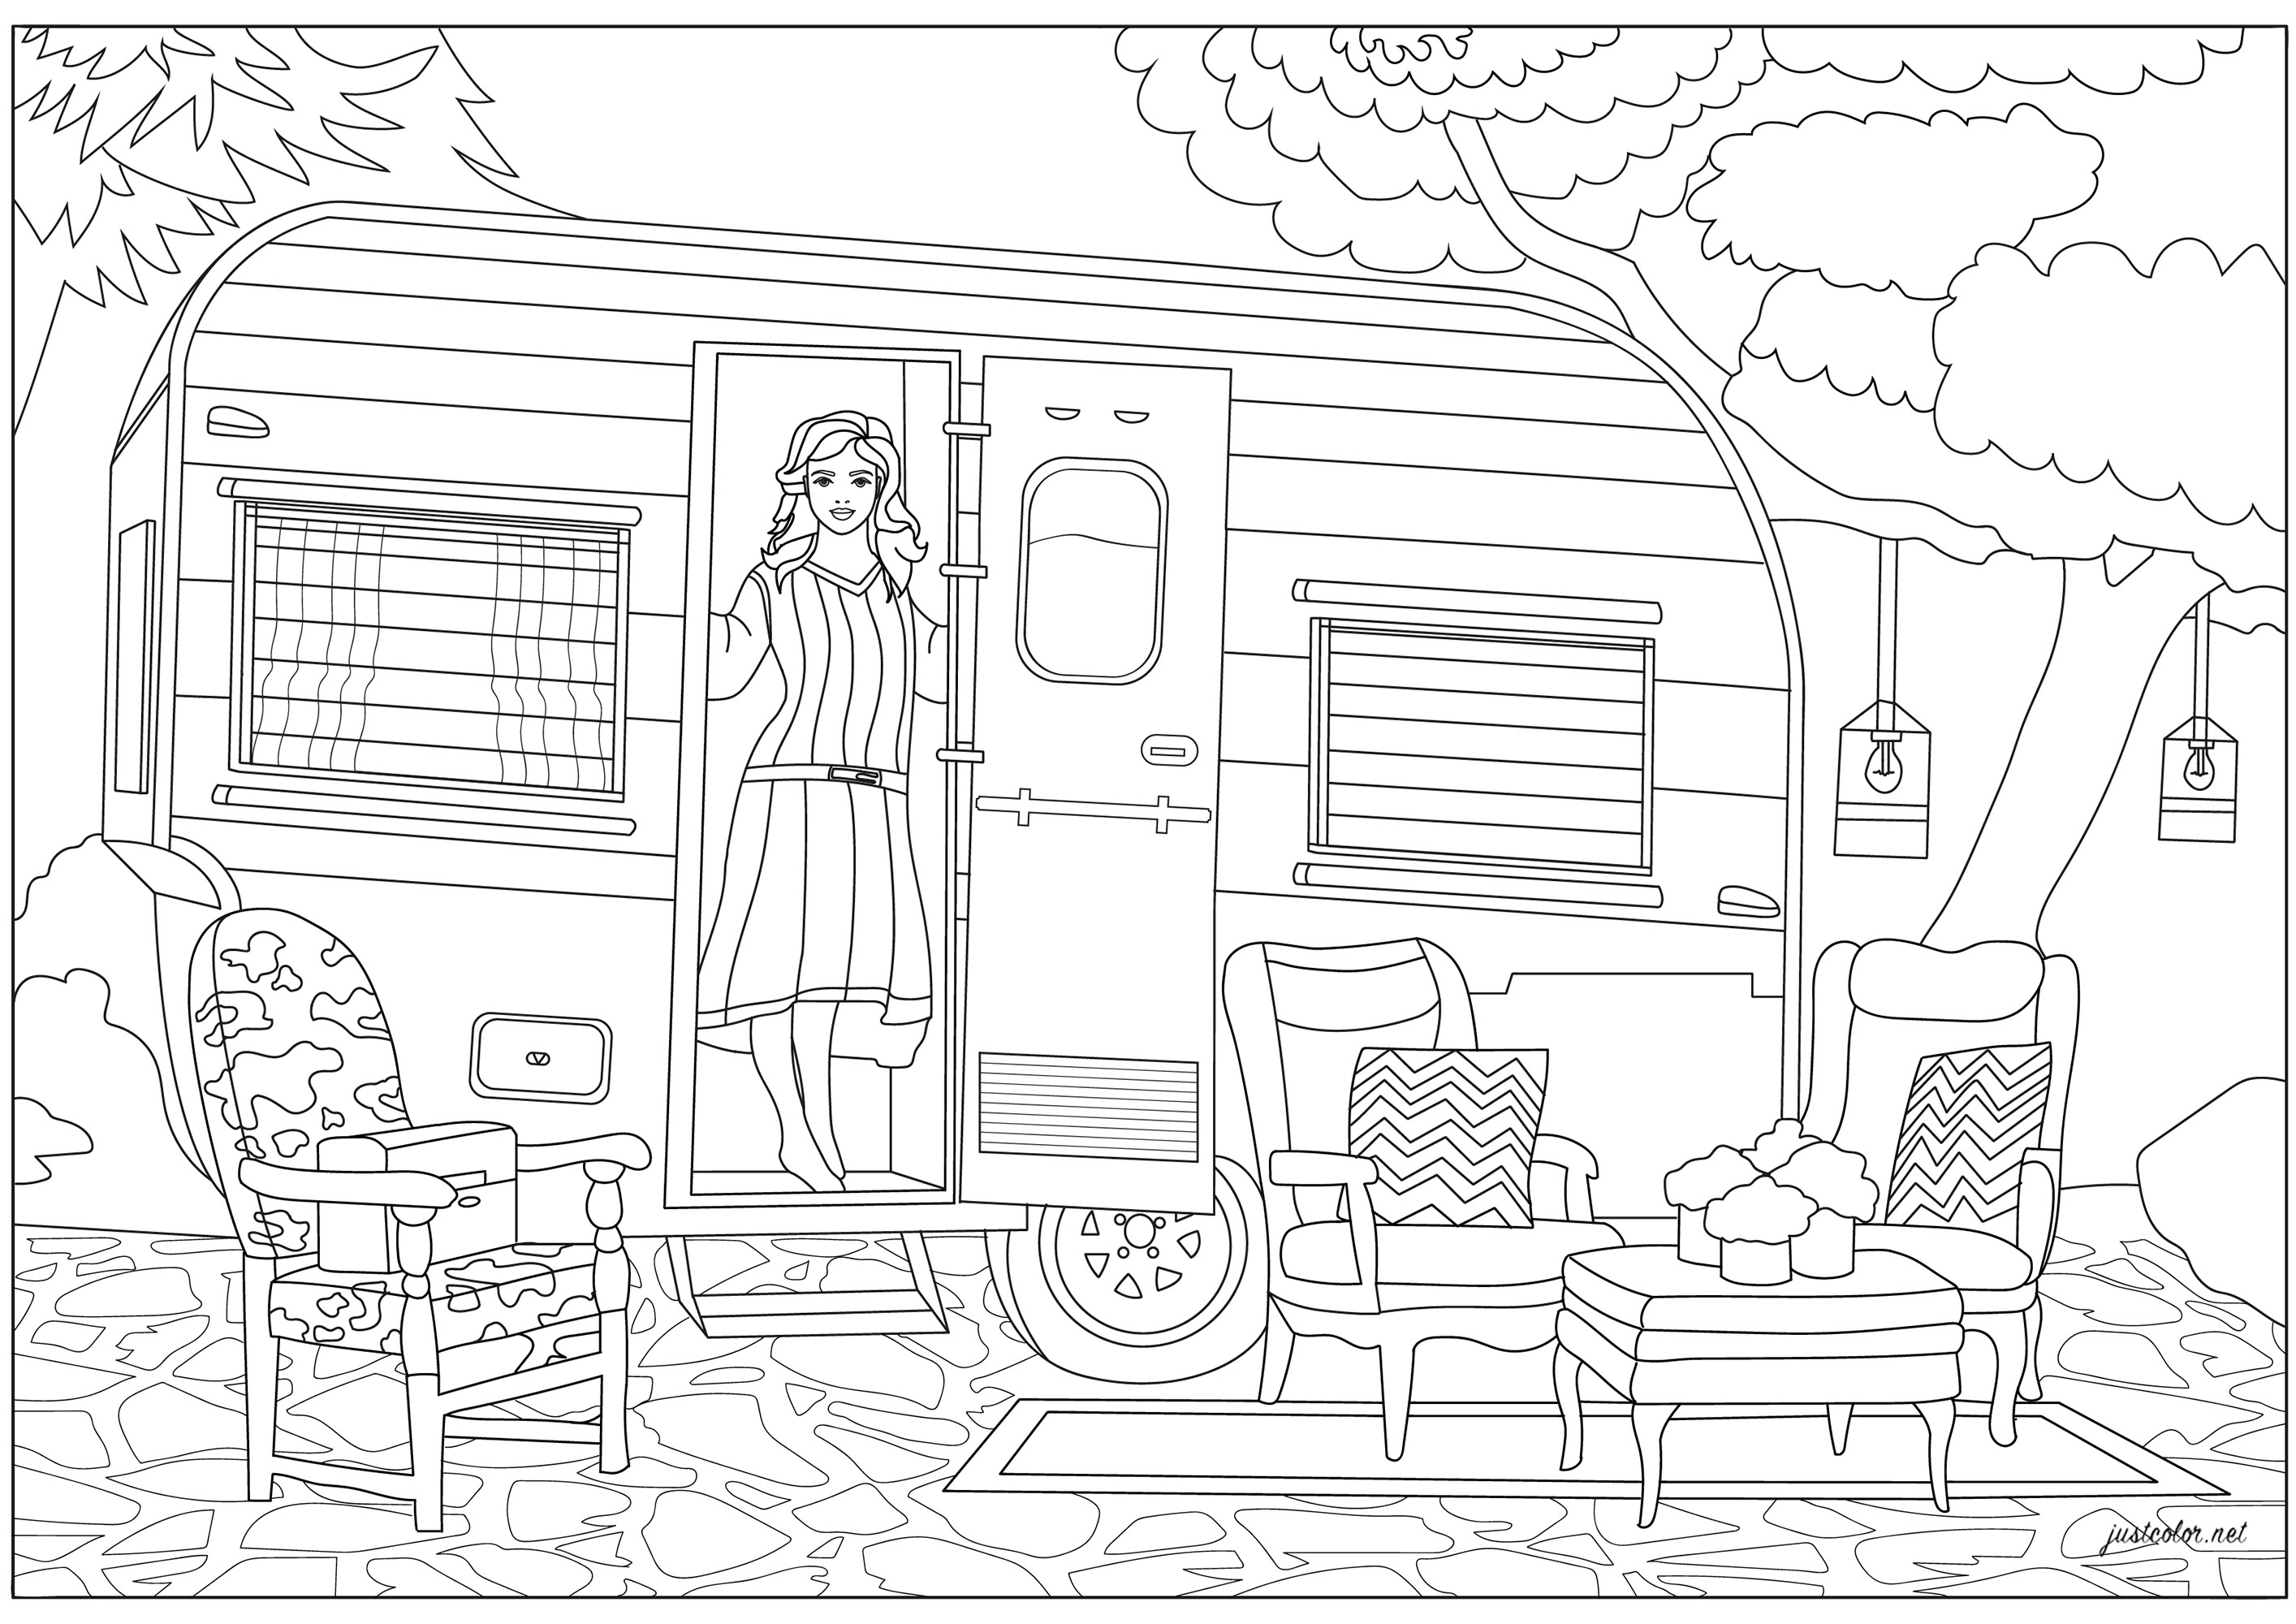 Cozy vacation in a vintage caravan for this pretty young woman, a comfortable return to nature, Artist : Morgan